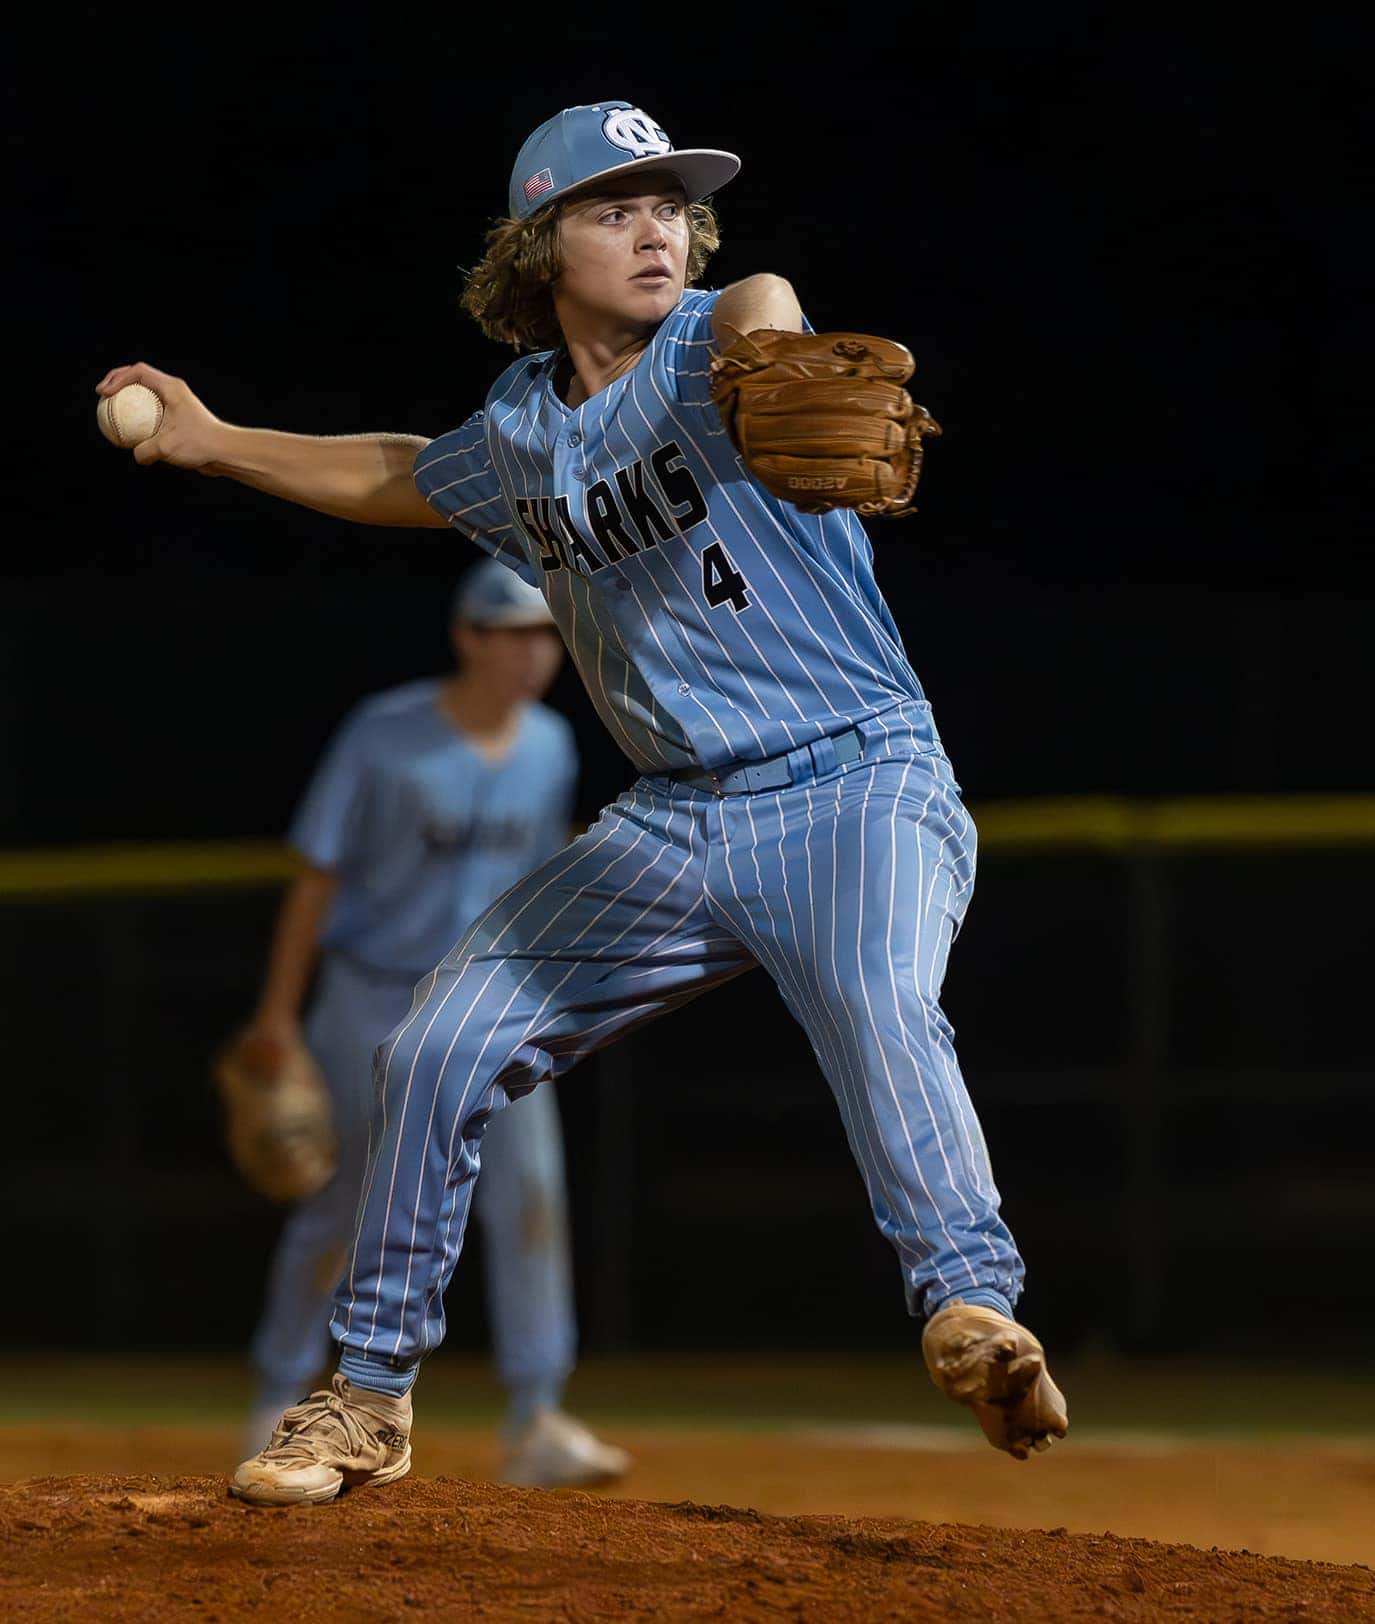 Nature Coast Tech ,4, Bryce Hewell pitched the final inning in the 7-0 win against visiting Hernando High in the 4A District 6 title game. Photo by [Joseph Dicristofalo]